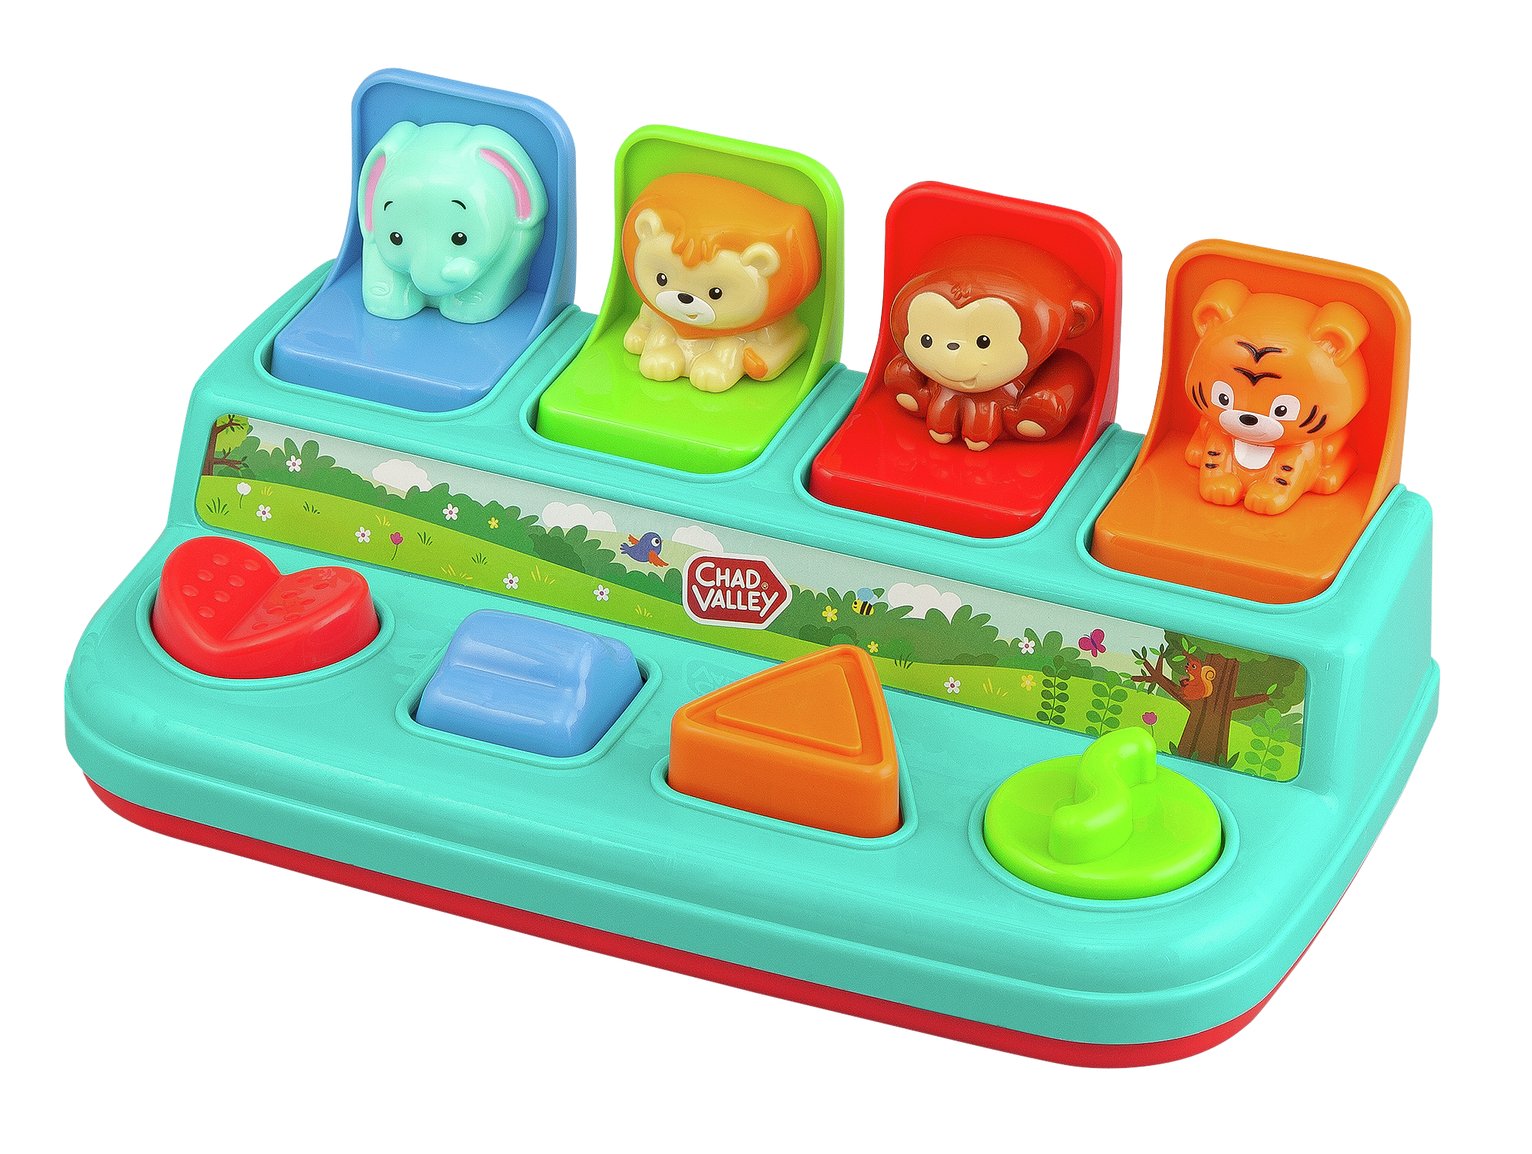 Child (1-2 years) Early learning toys 